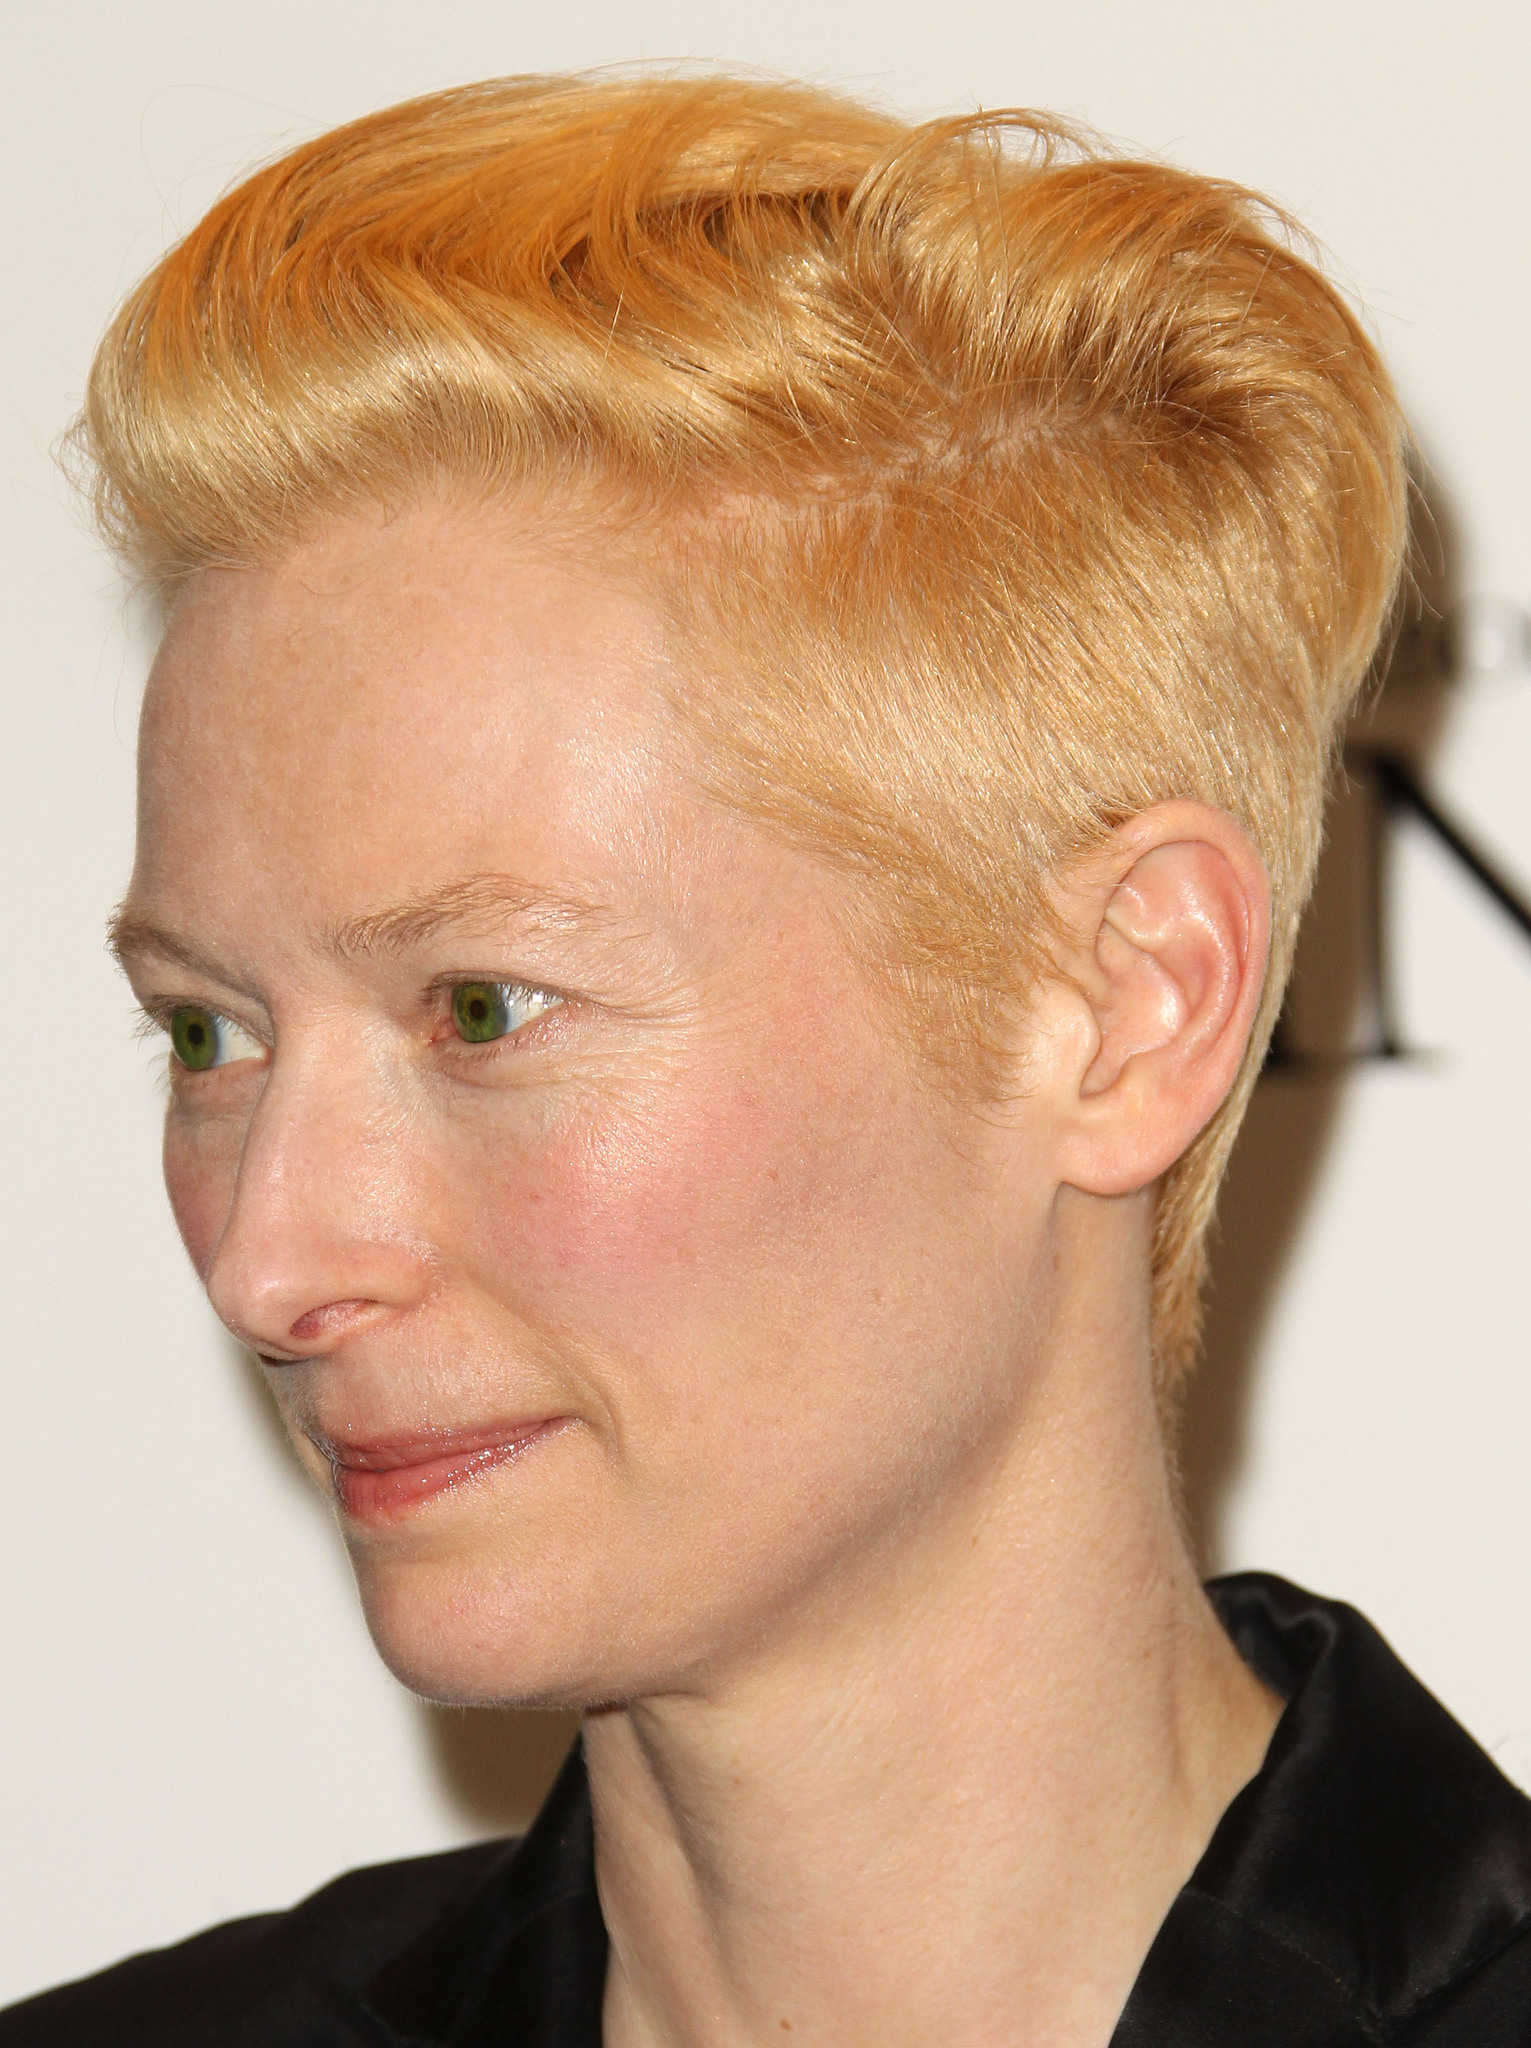 Tilda Swinton at event of We Need to Talk About Kevin (2011)